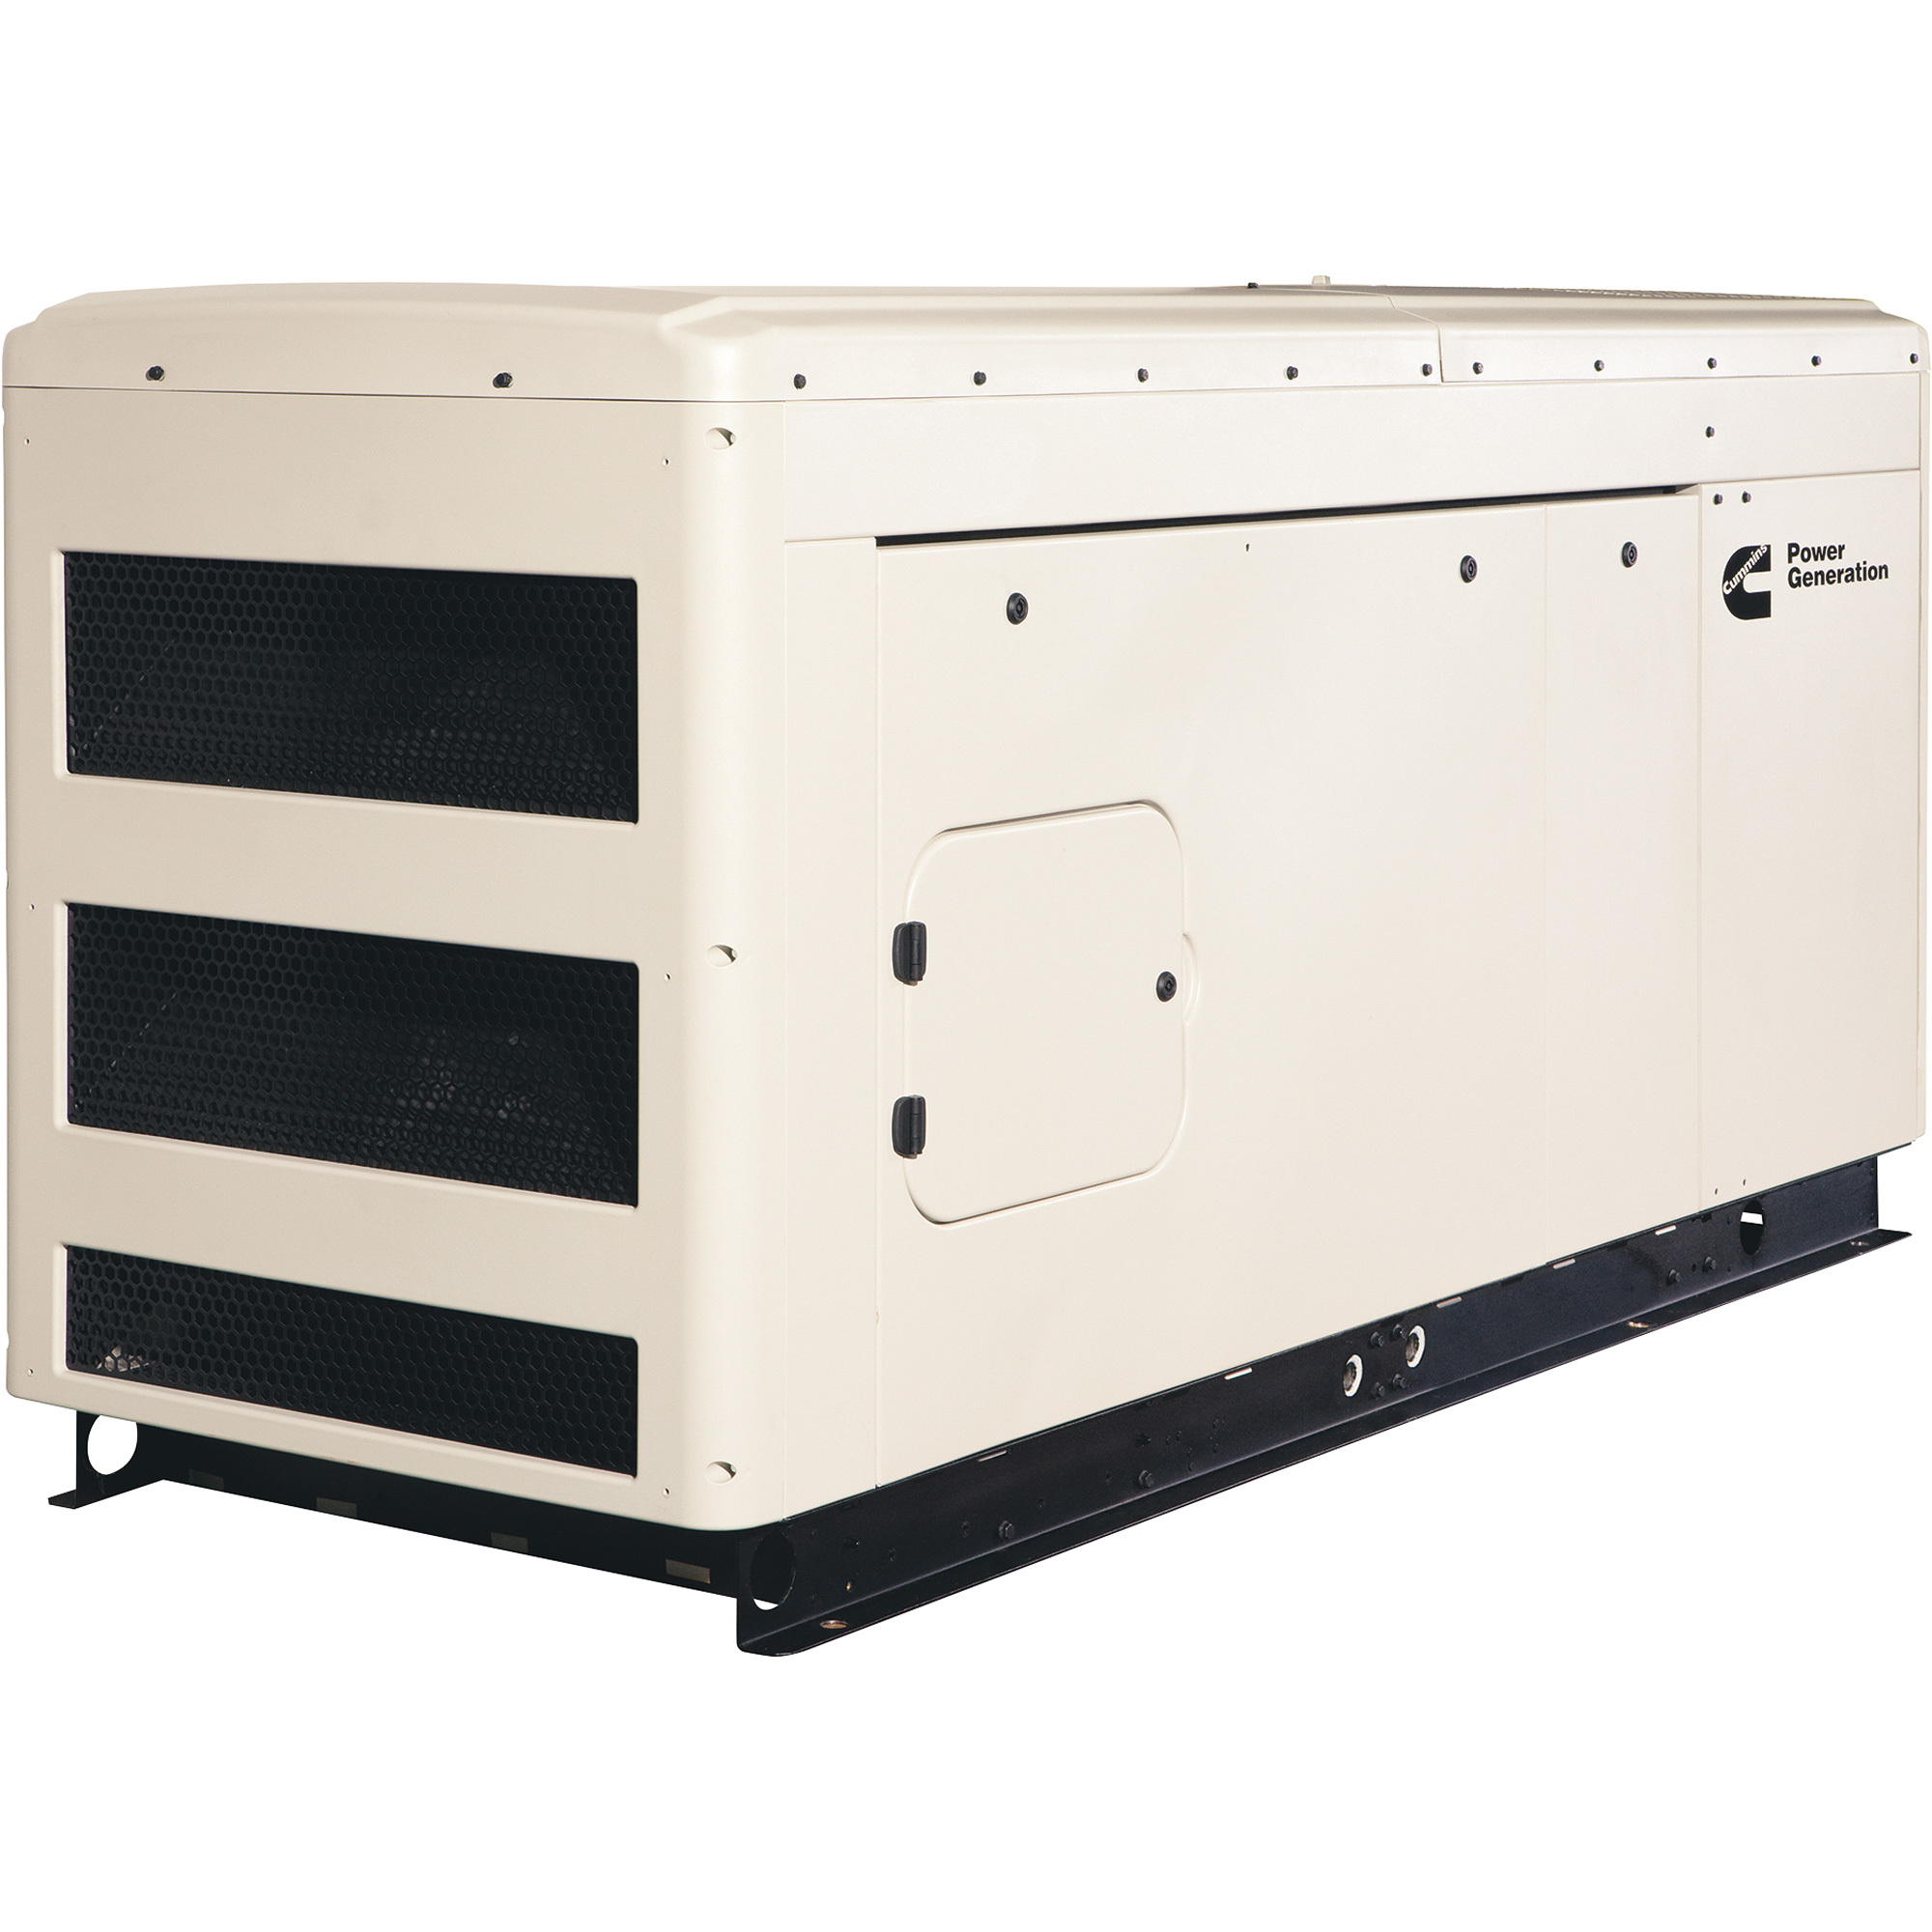 Cummins Commercial Standby Generator 30kW, LP/NG, 120/208 Volts